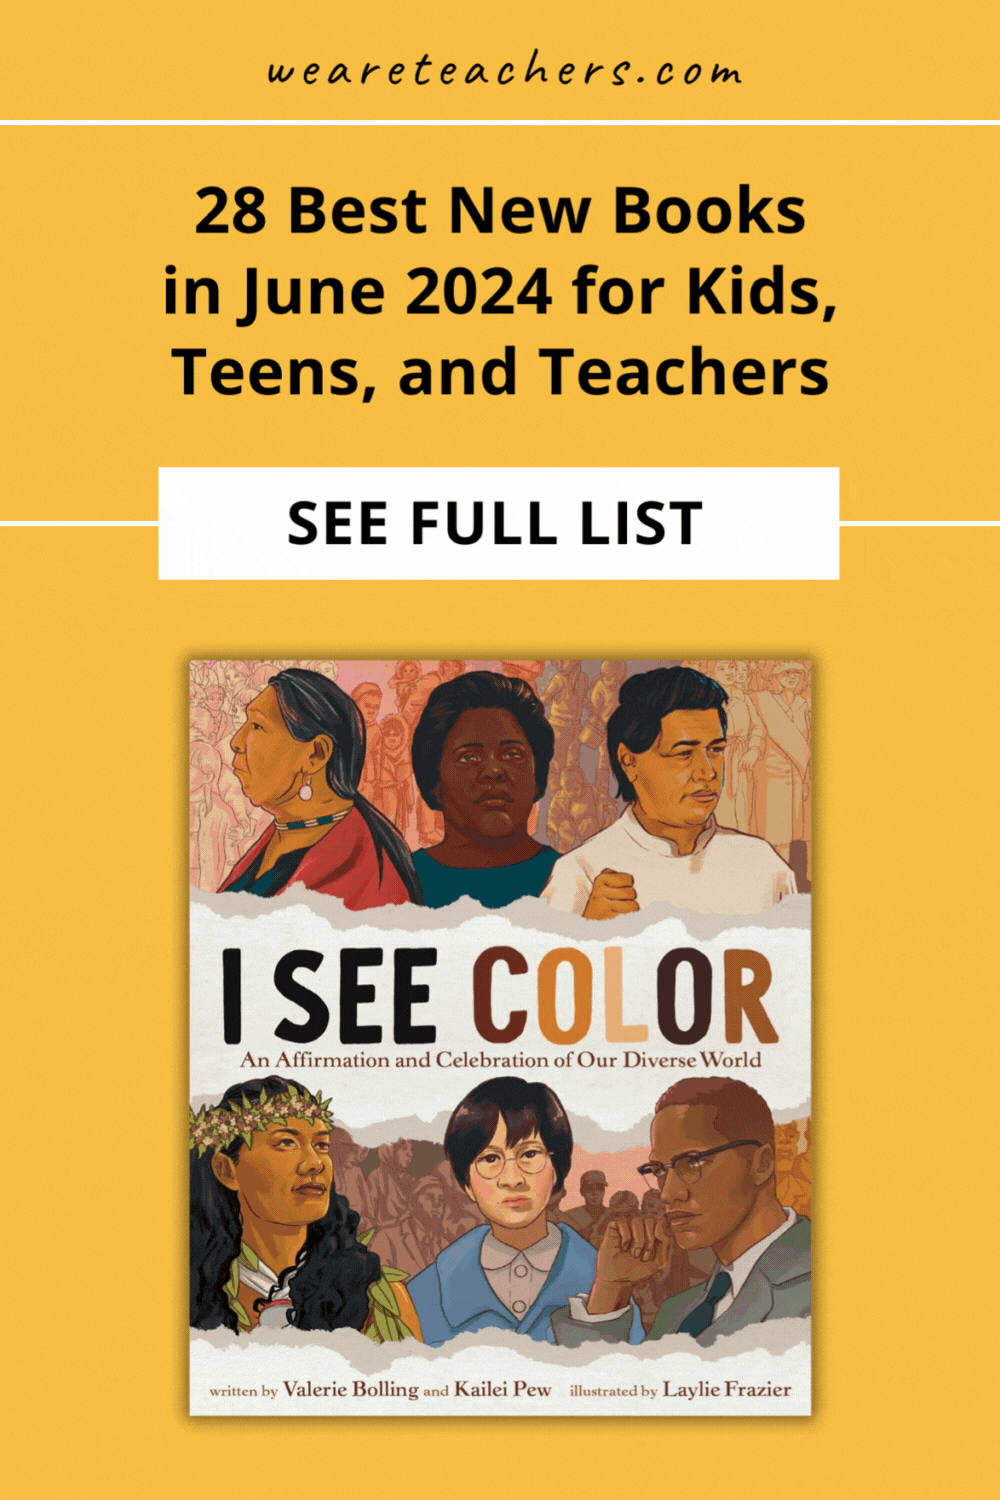 Find the perfect summer break reads with these new June 2024 books: fiction for all ages, graphic novels, nonfiction, and more.